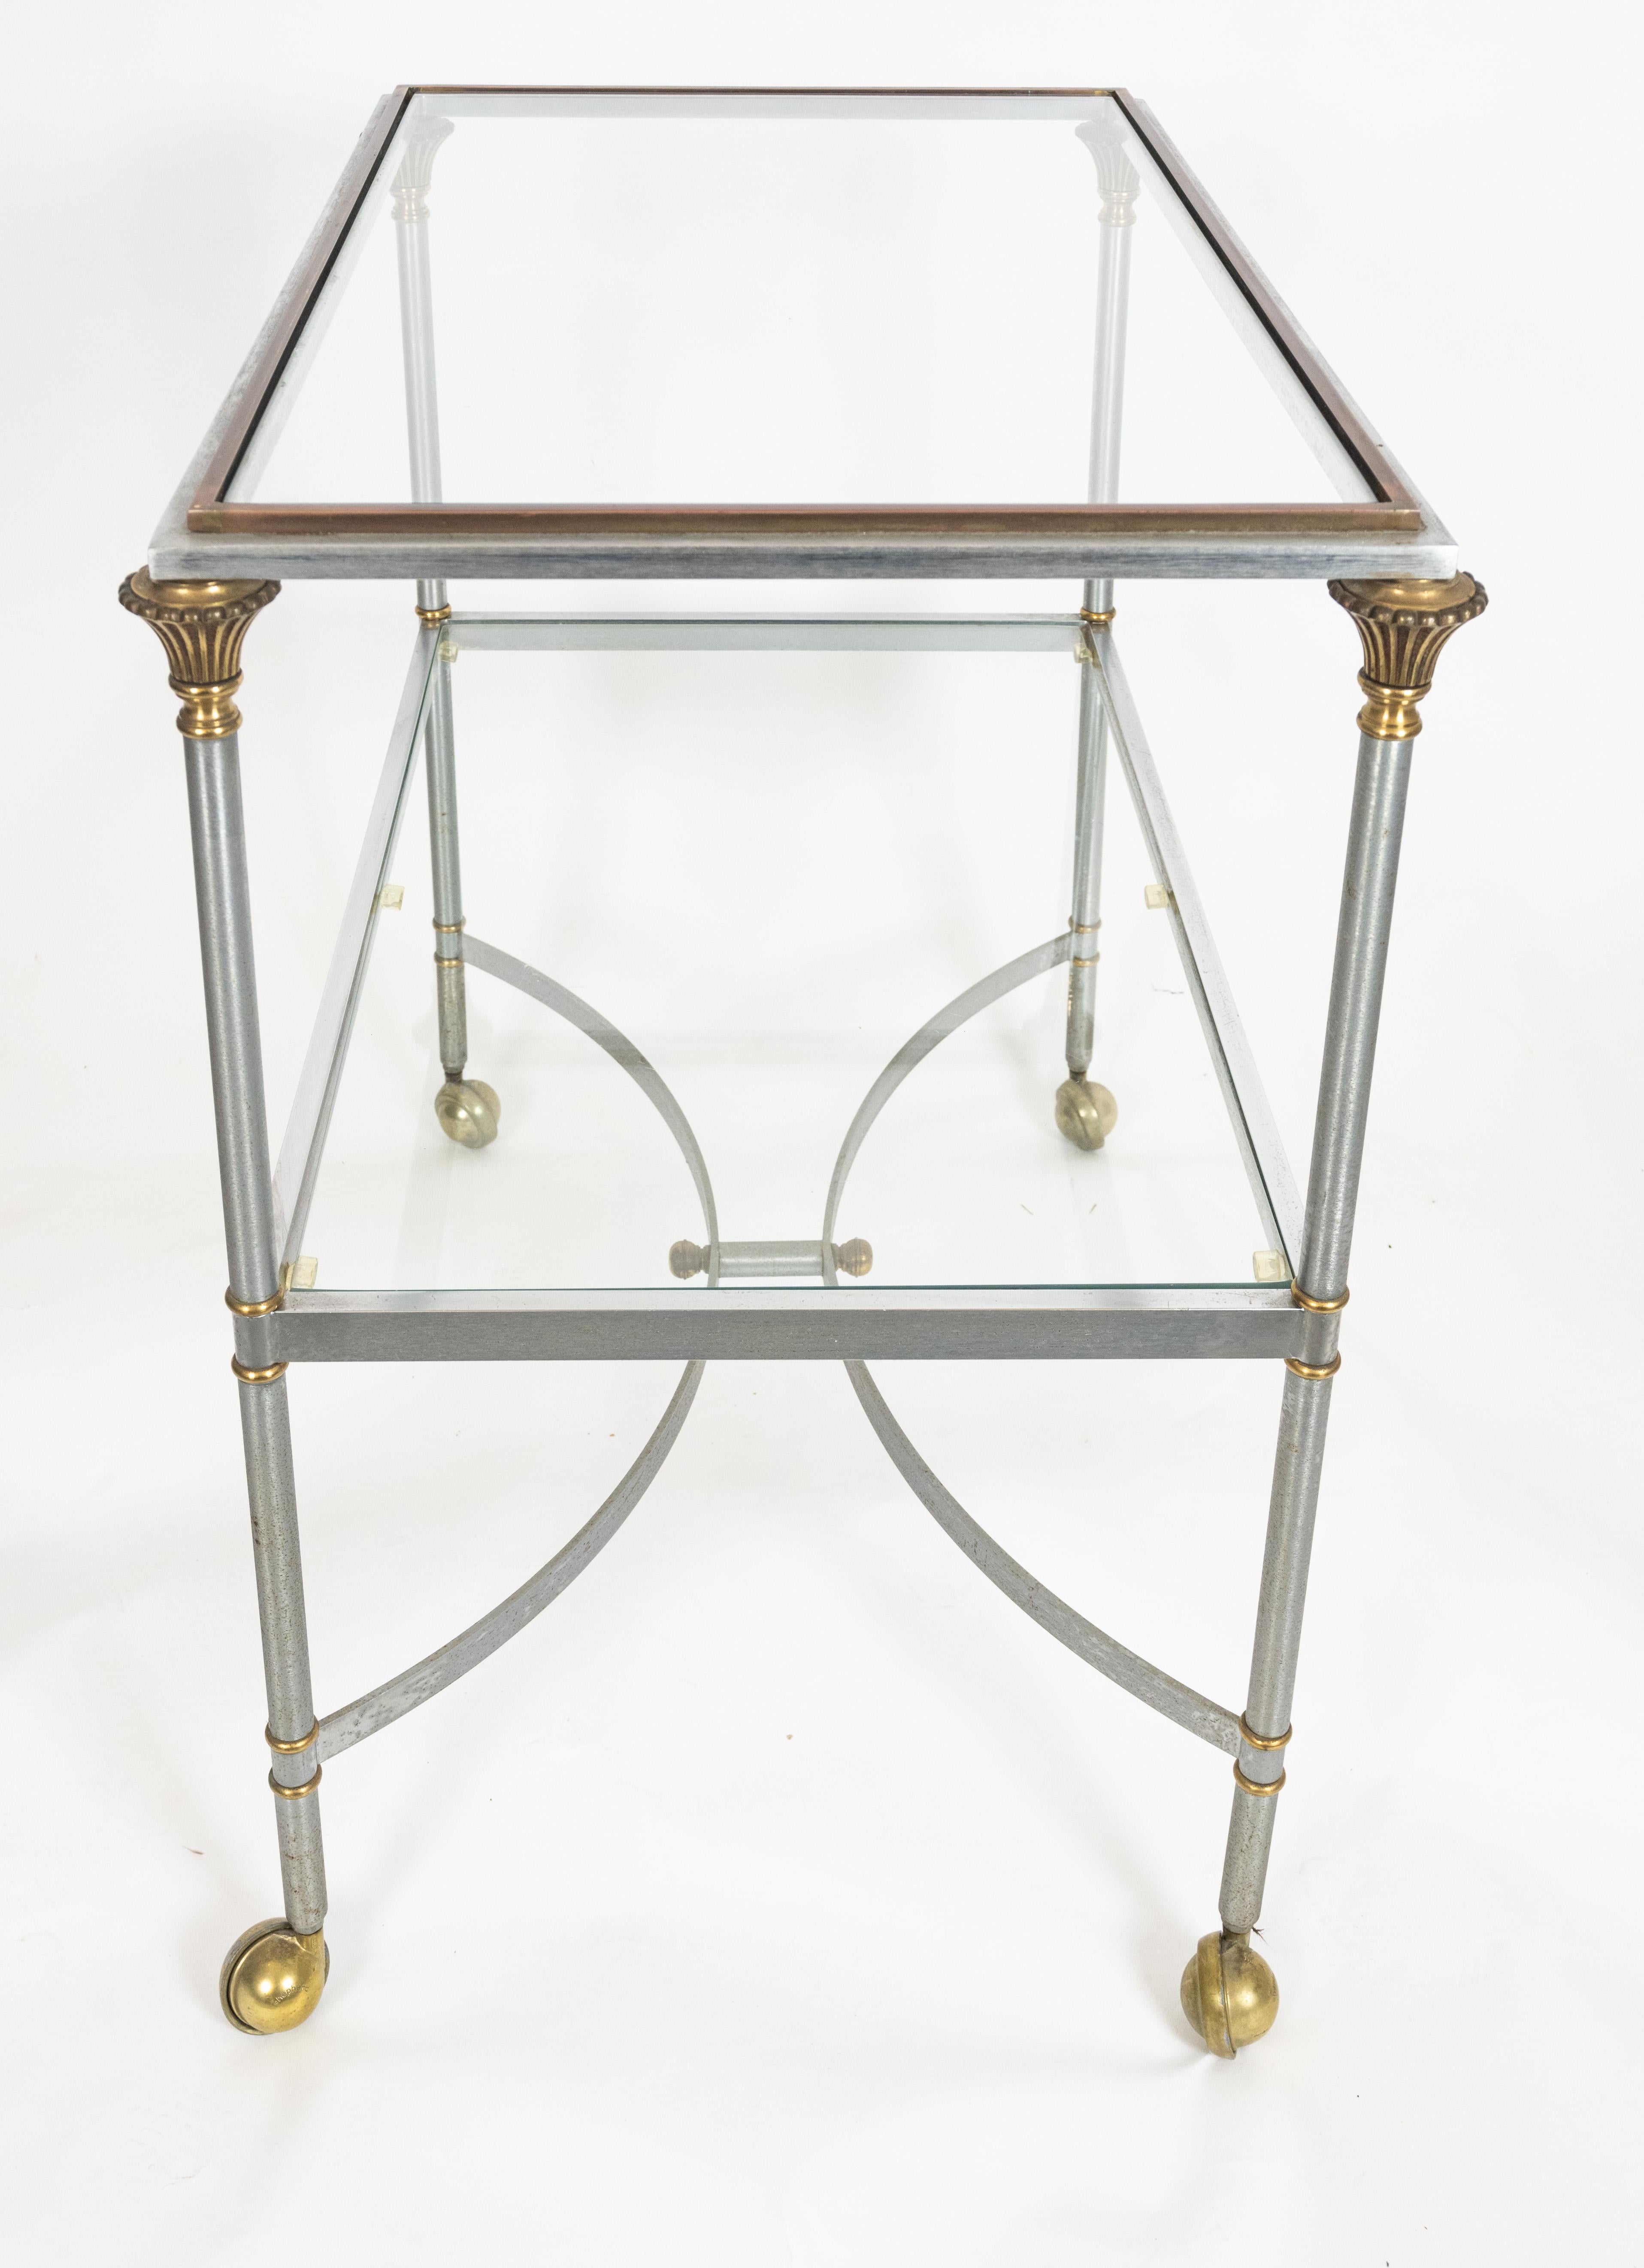 A two-tiered rectangular cart in the manner of Jansen Maison with glass surfaces inset with a steel and bronze frame. The four legs joined by c-shaped stretchers and supported by round brass castors. Circa 1960.